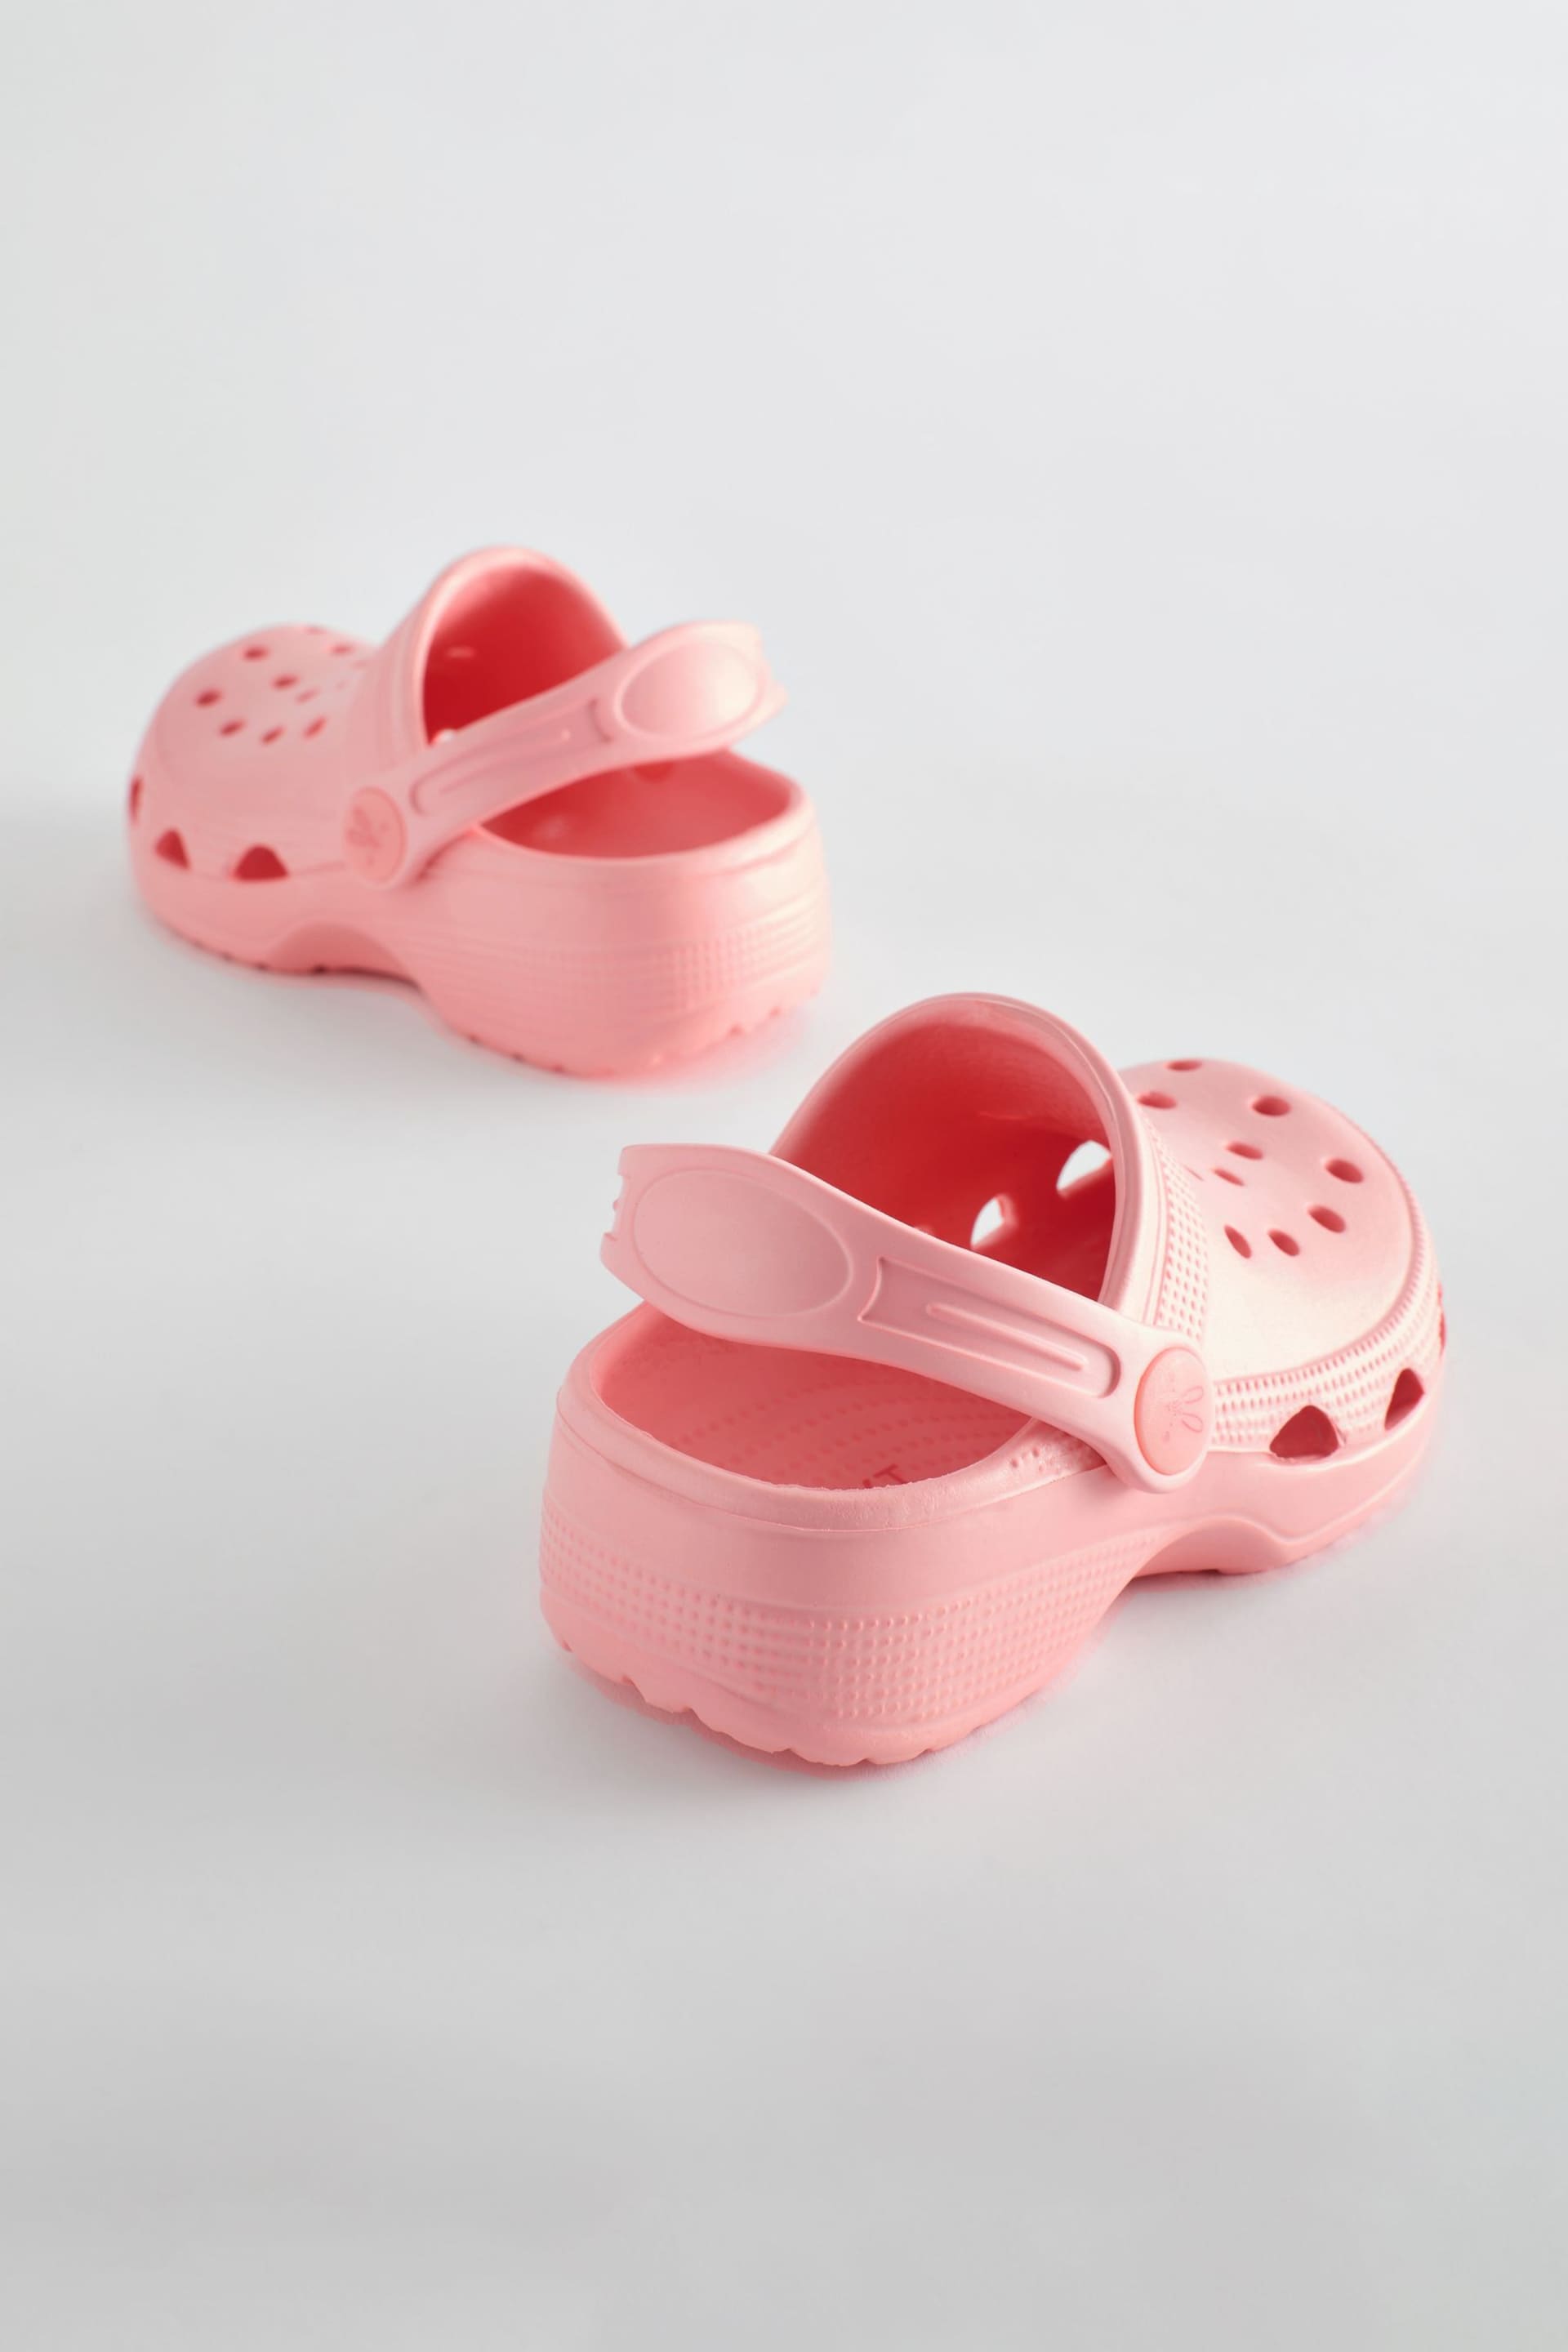 Pink Clogs - Image 6 of 6